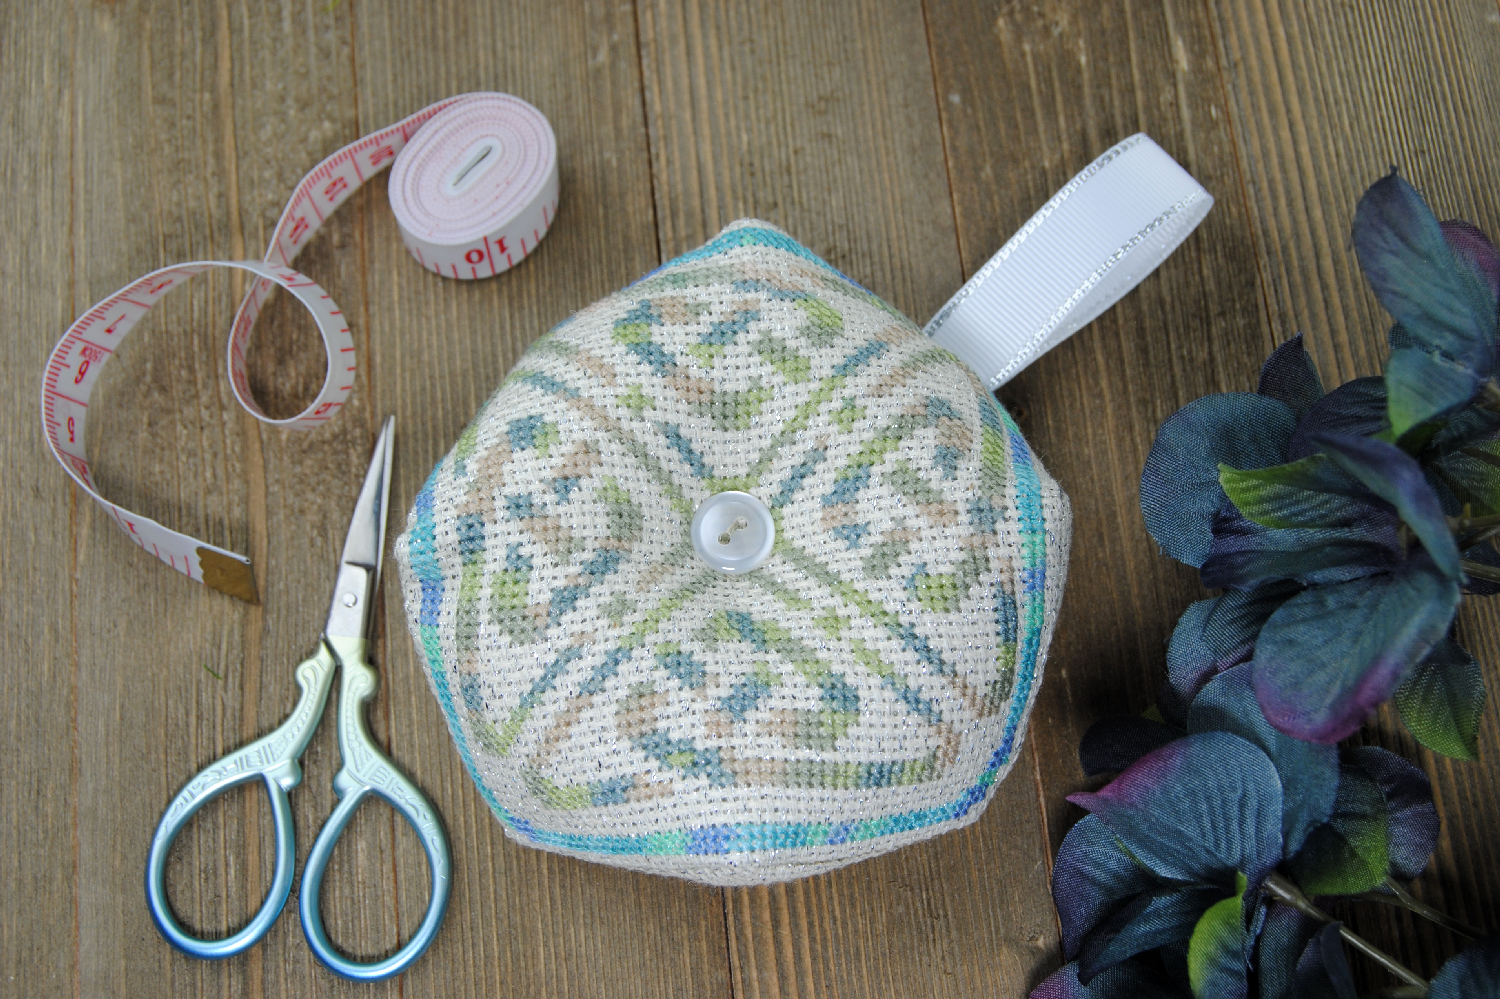 Variegated Thread - Tips for Cross Stitching with Multicolor Floss ⋆